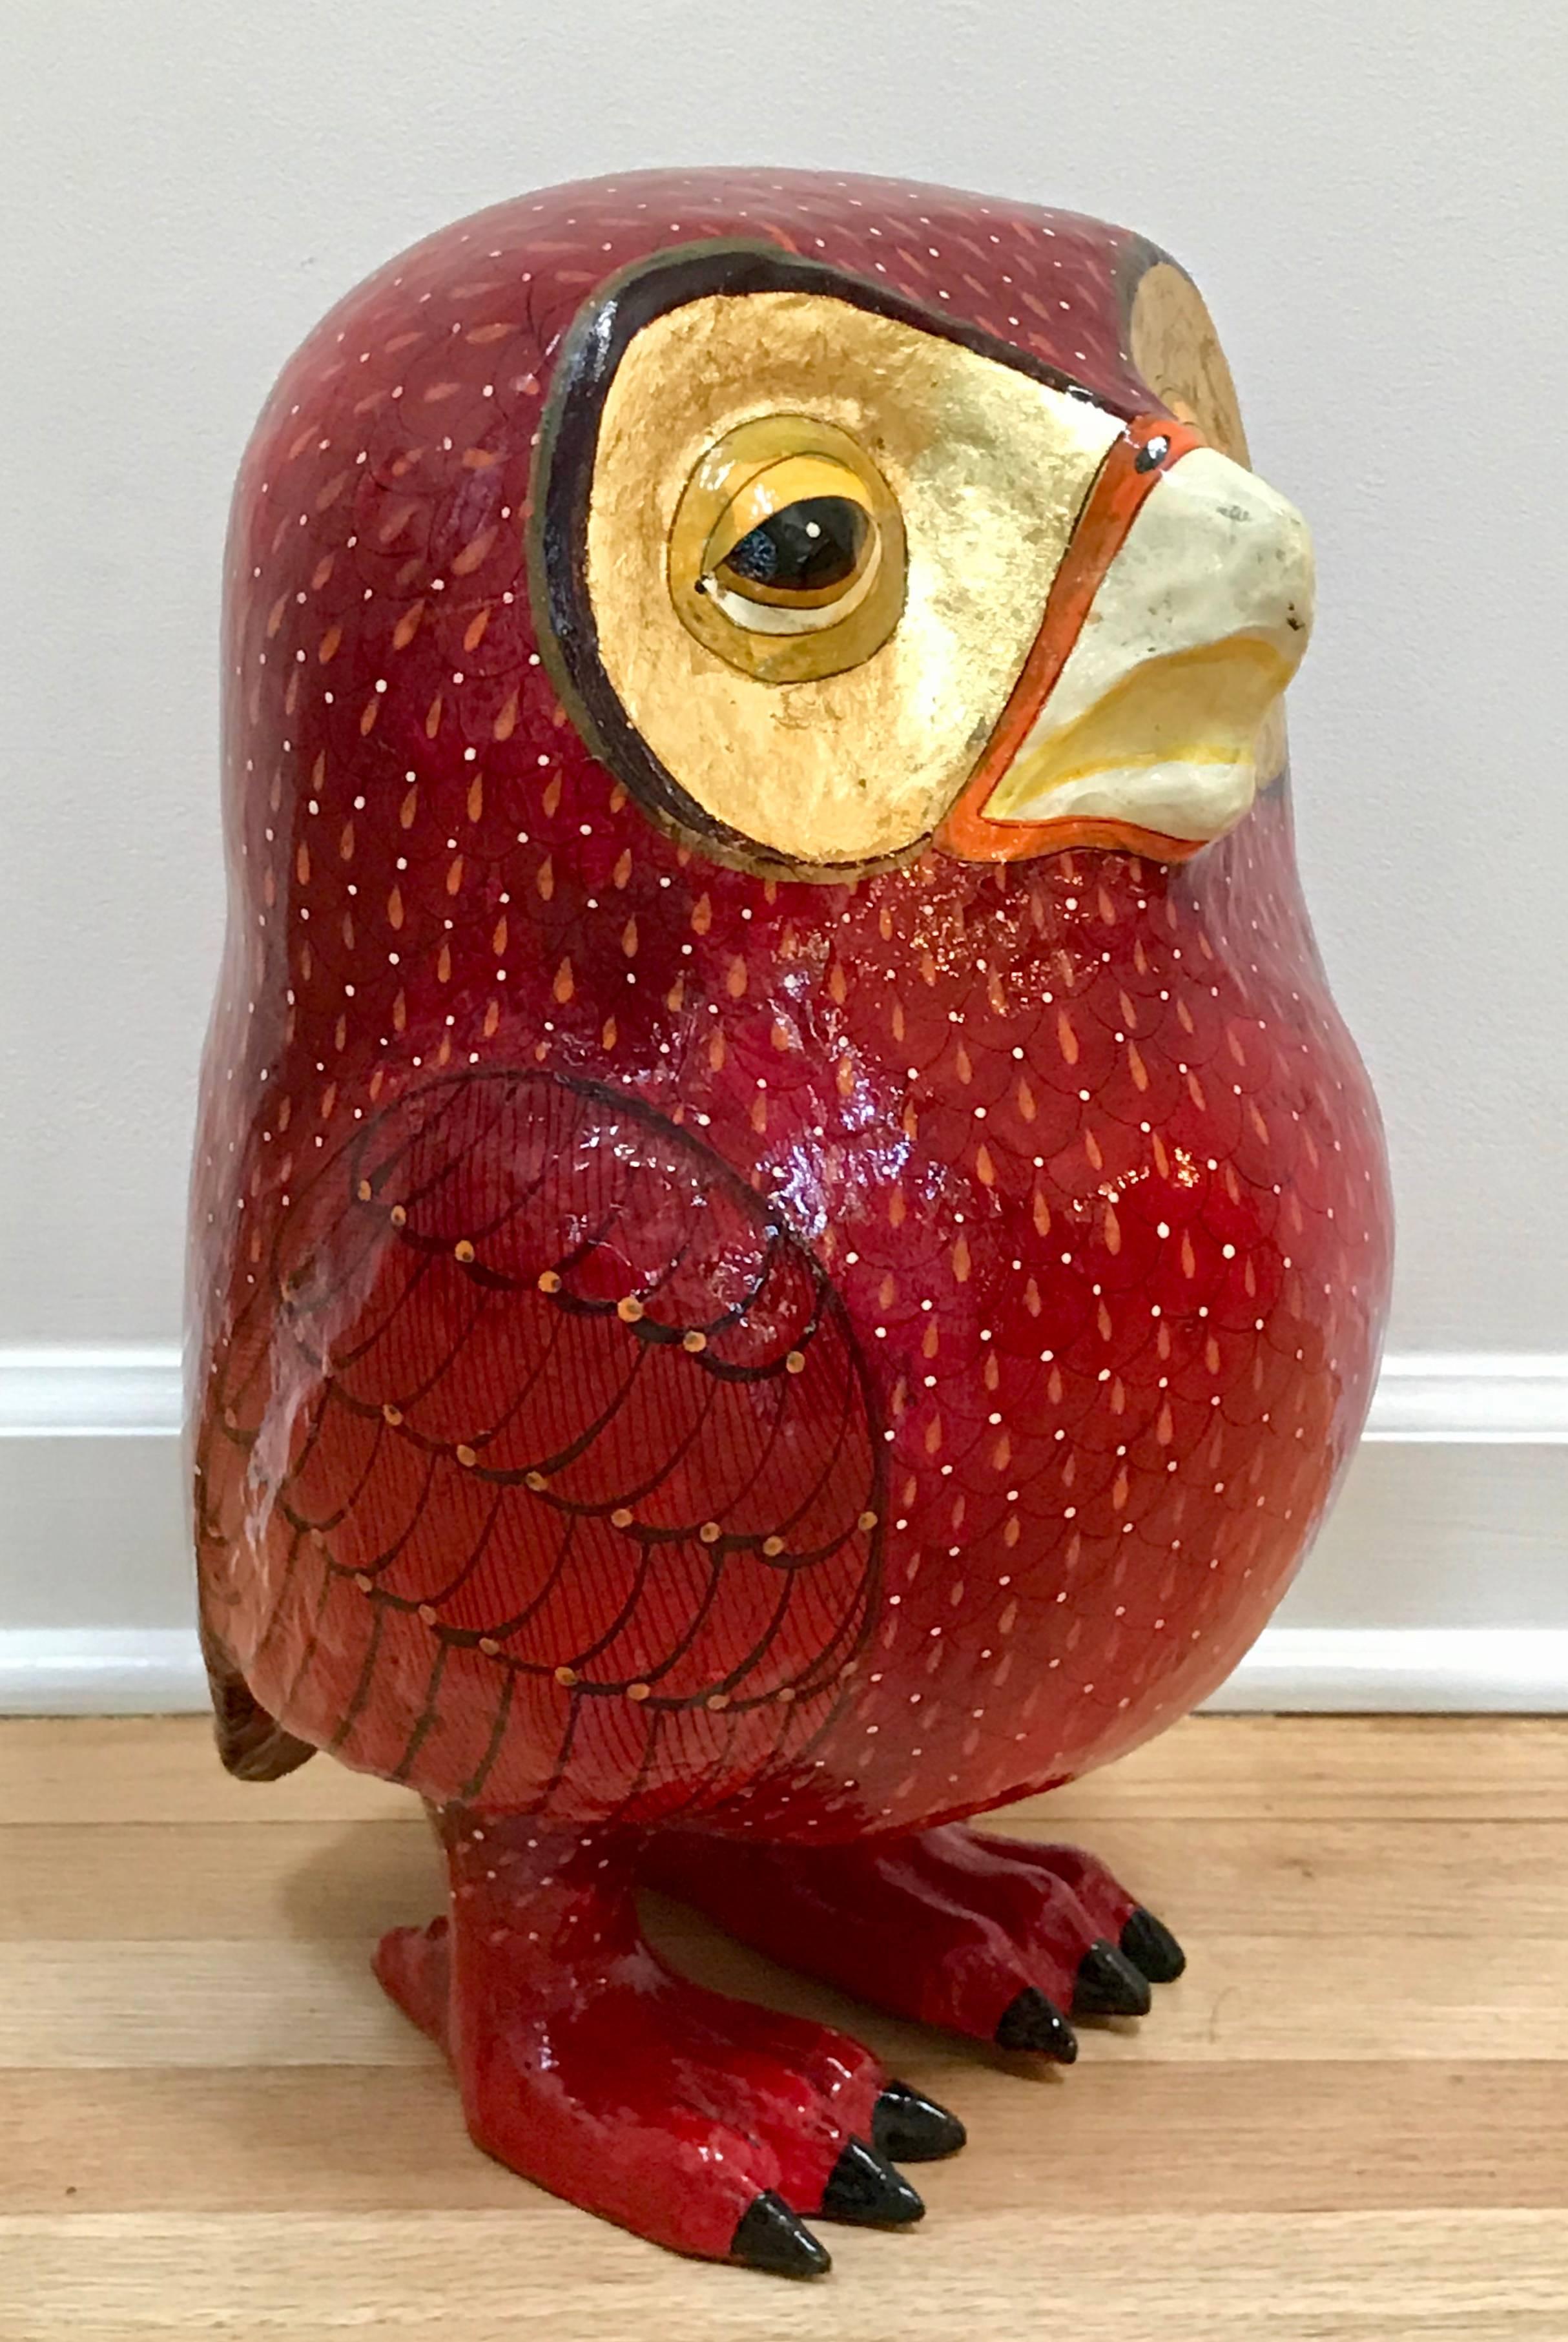 Hand-painted papier mâché owl in vibrant red with gold leafing, high gloss lacquer. Signed and numbered 83/100.